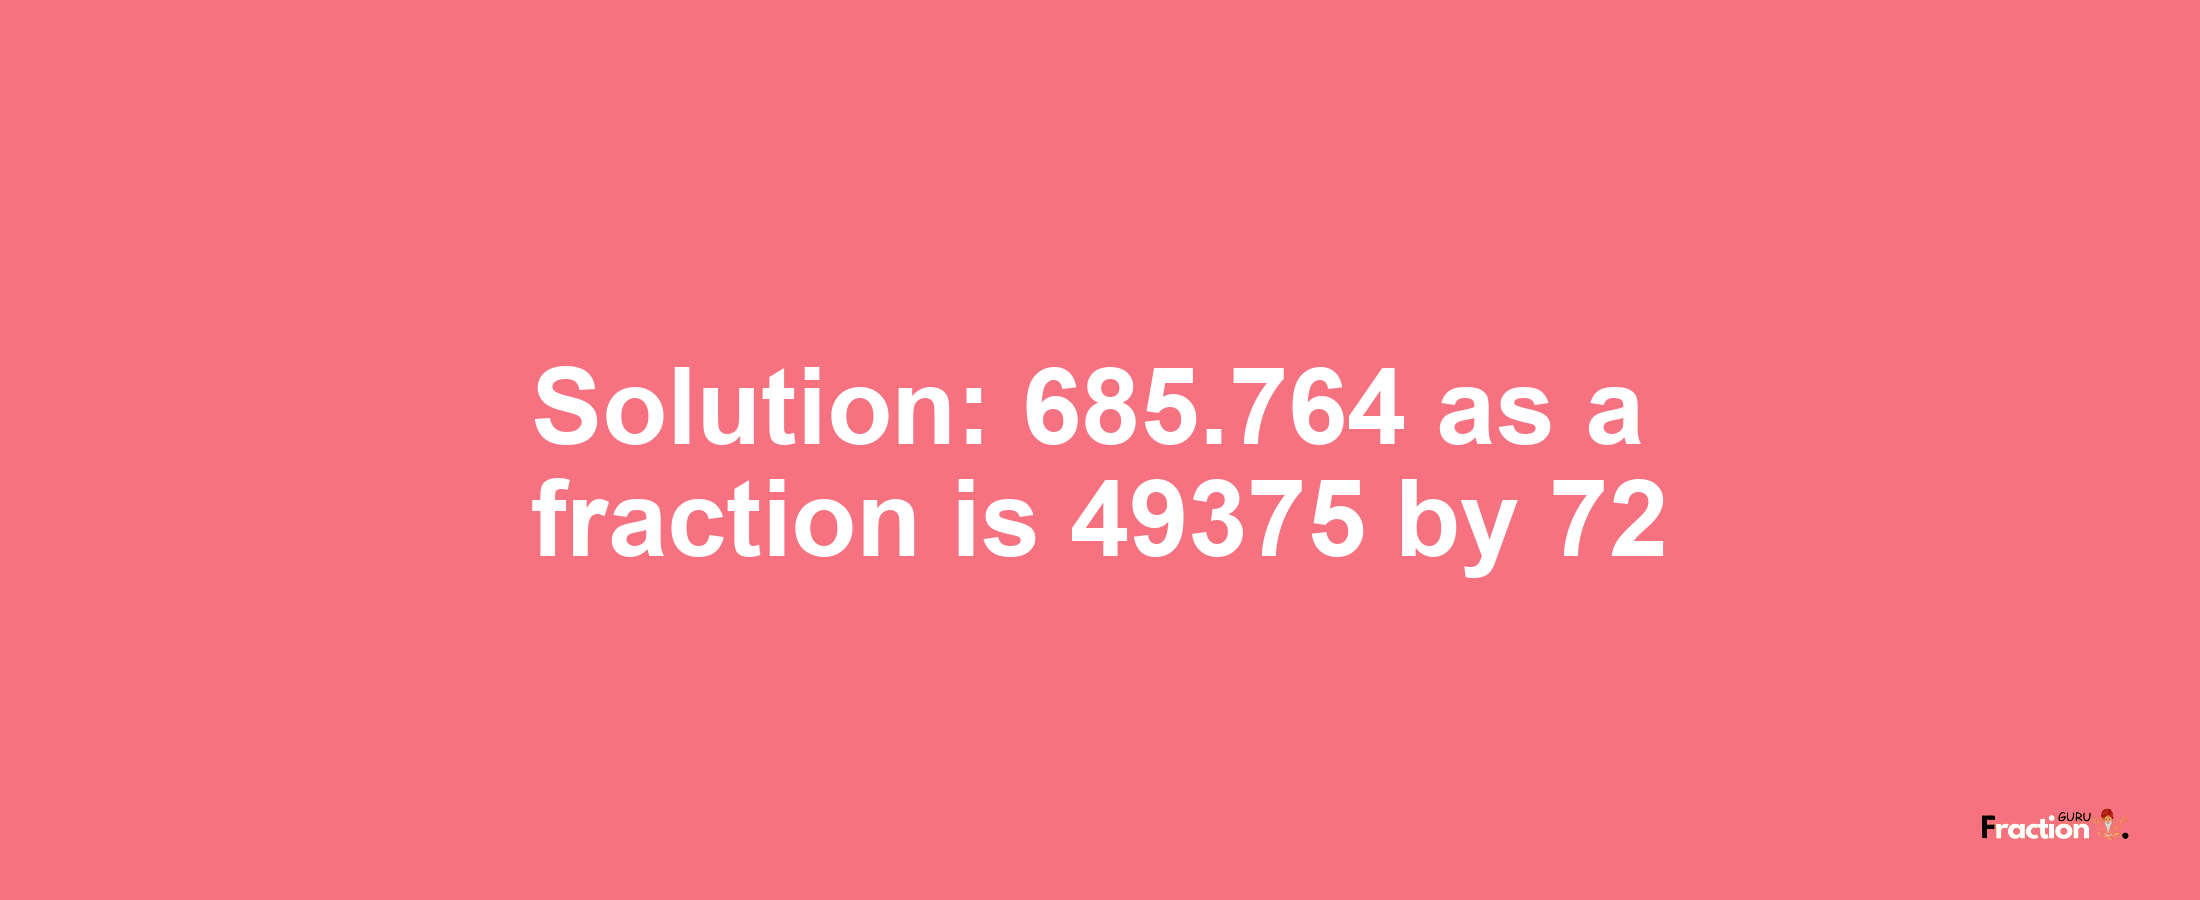 Solution:685.764 as a fraction is 49375/72